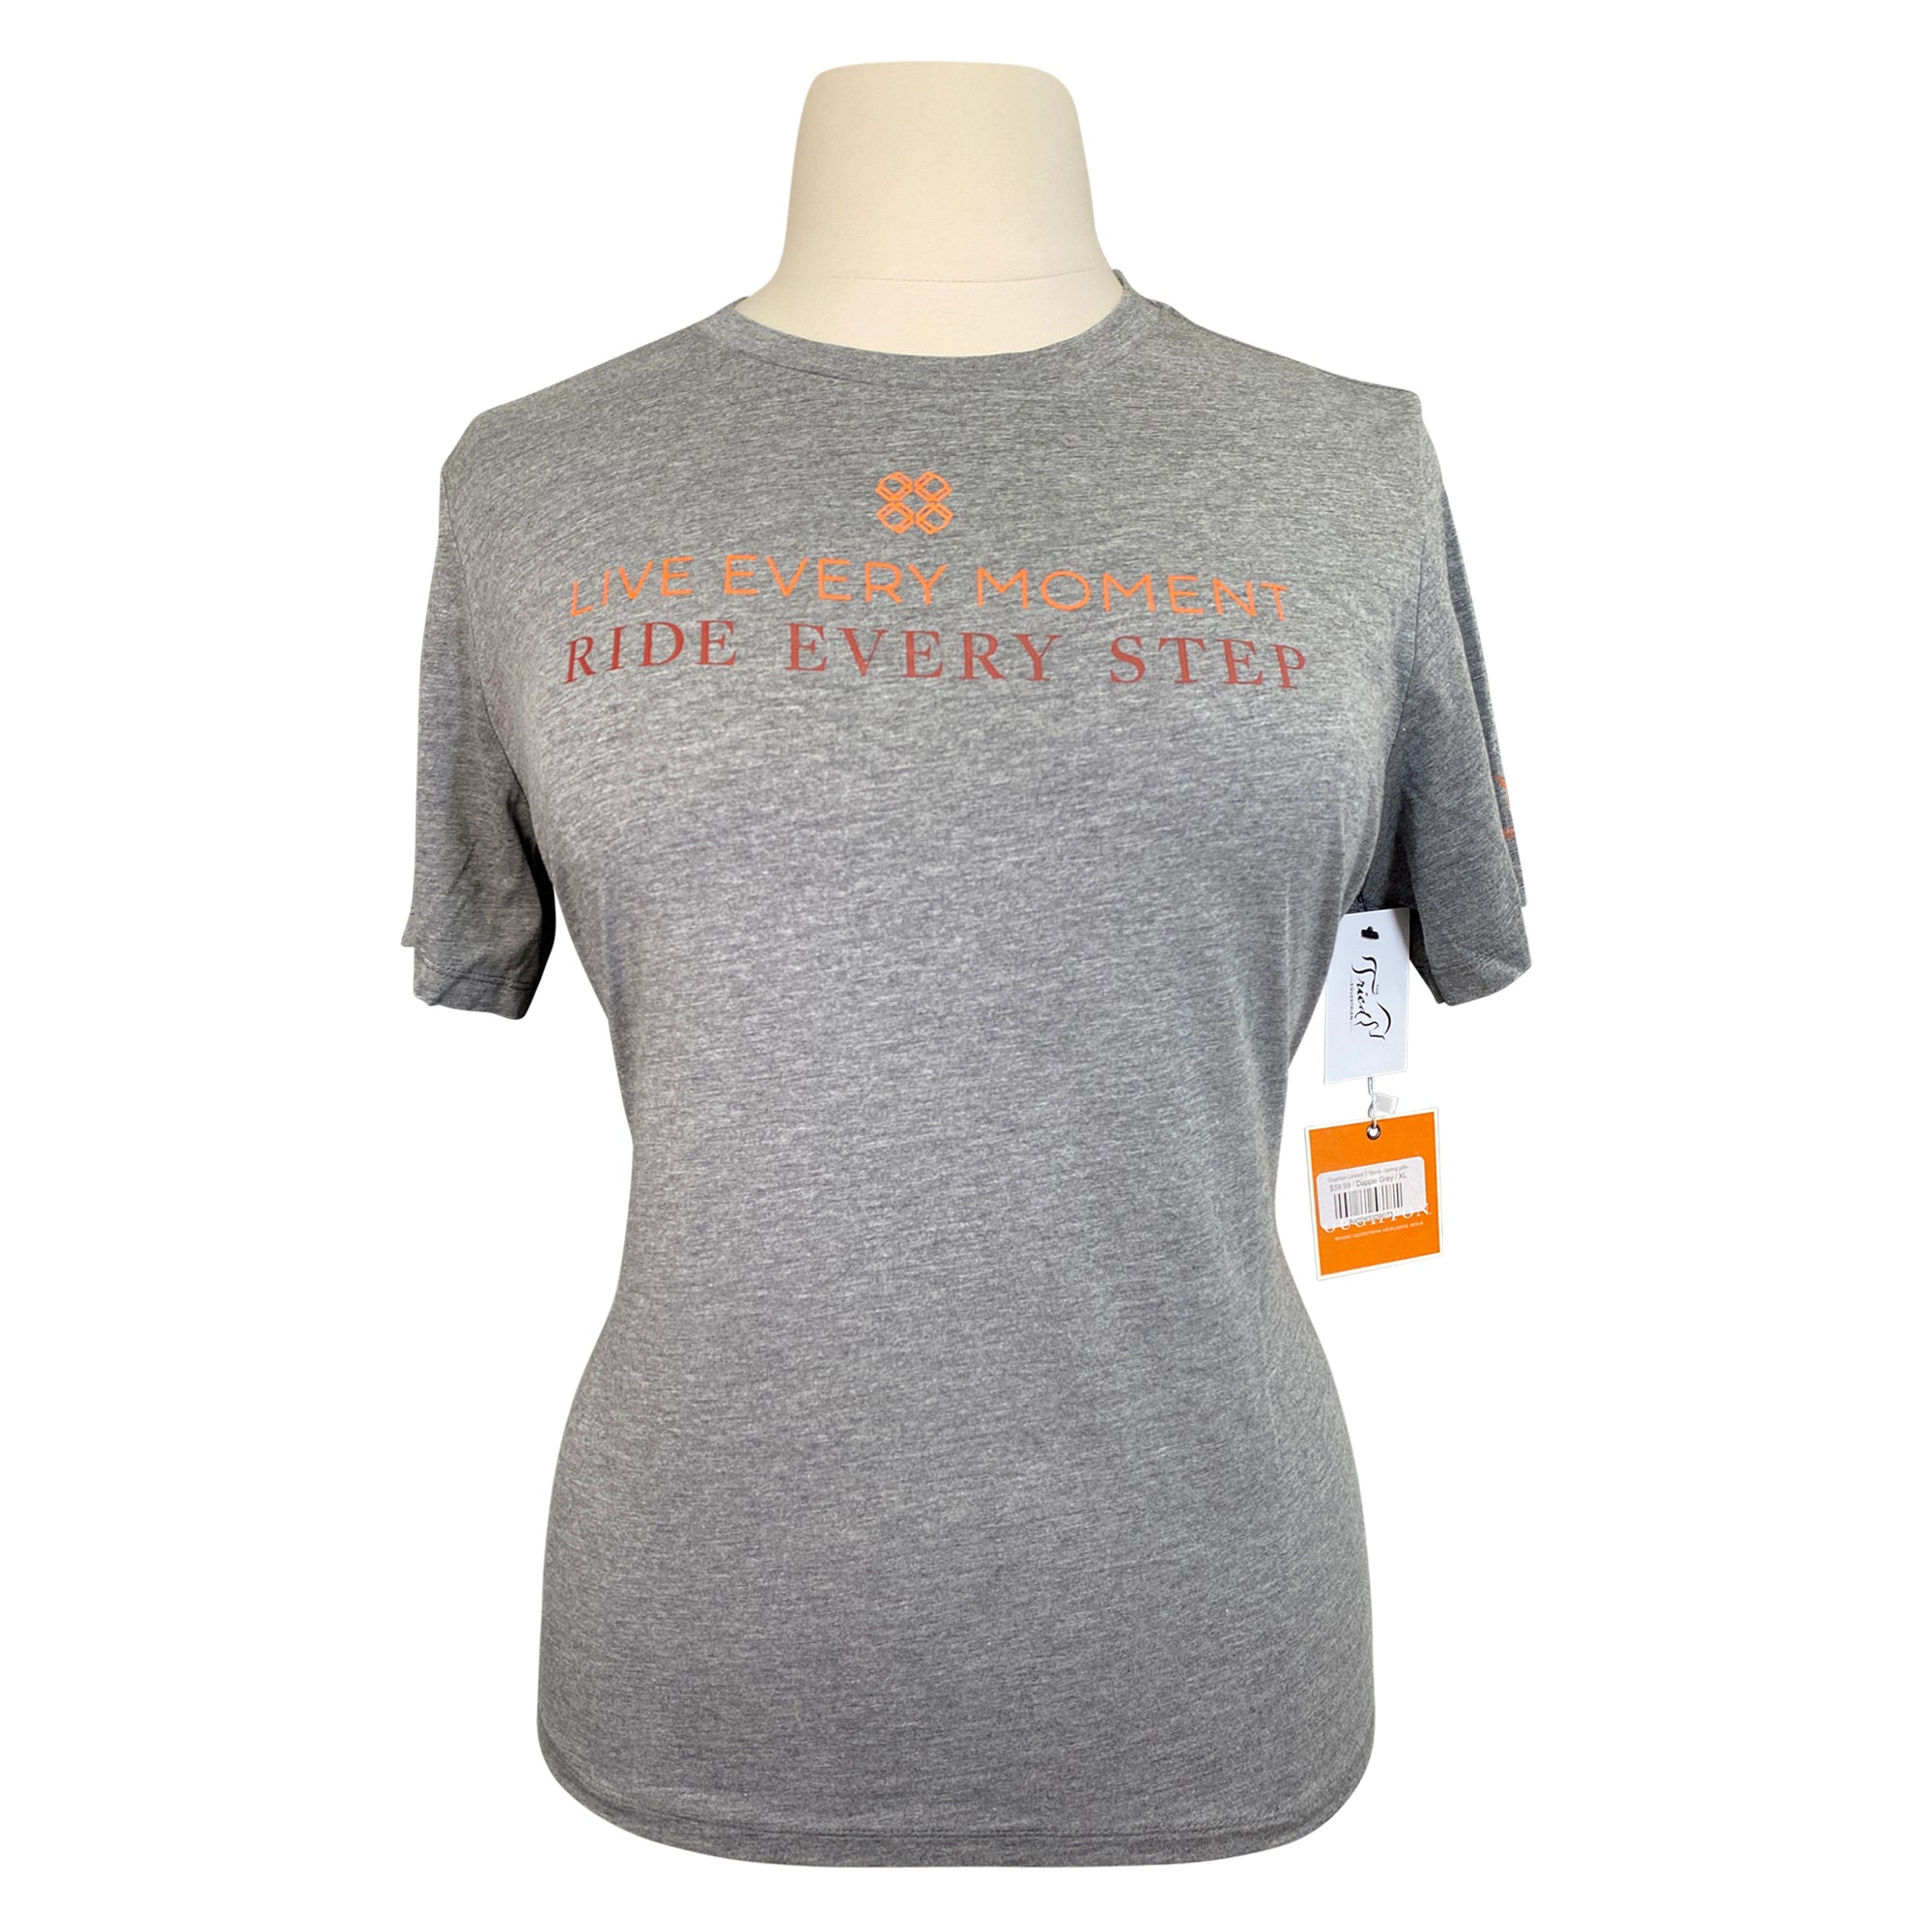 Oughton Live Every Moment T-Shirt in Dapple Grey